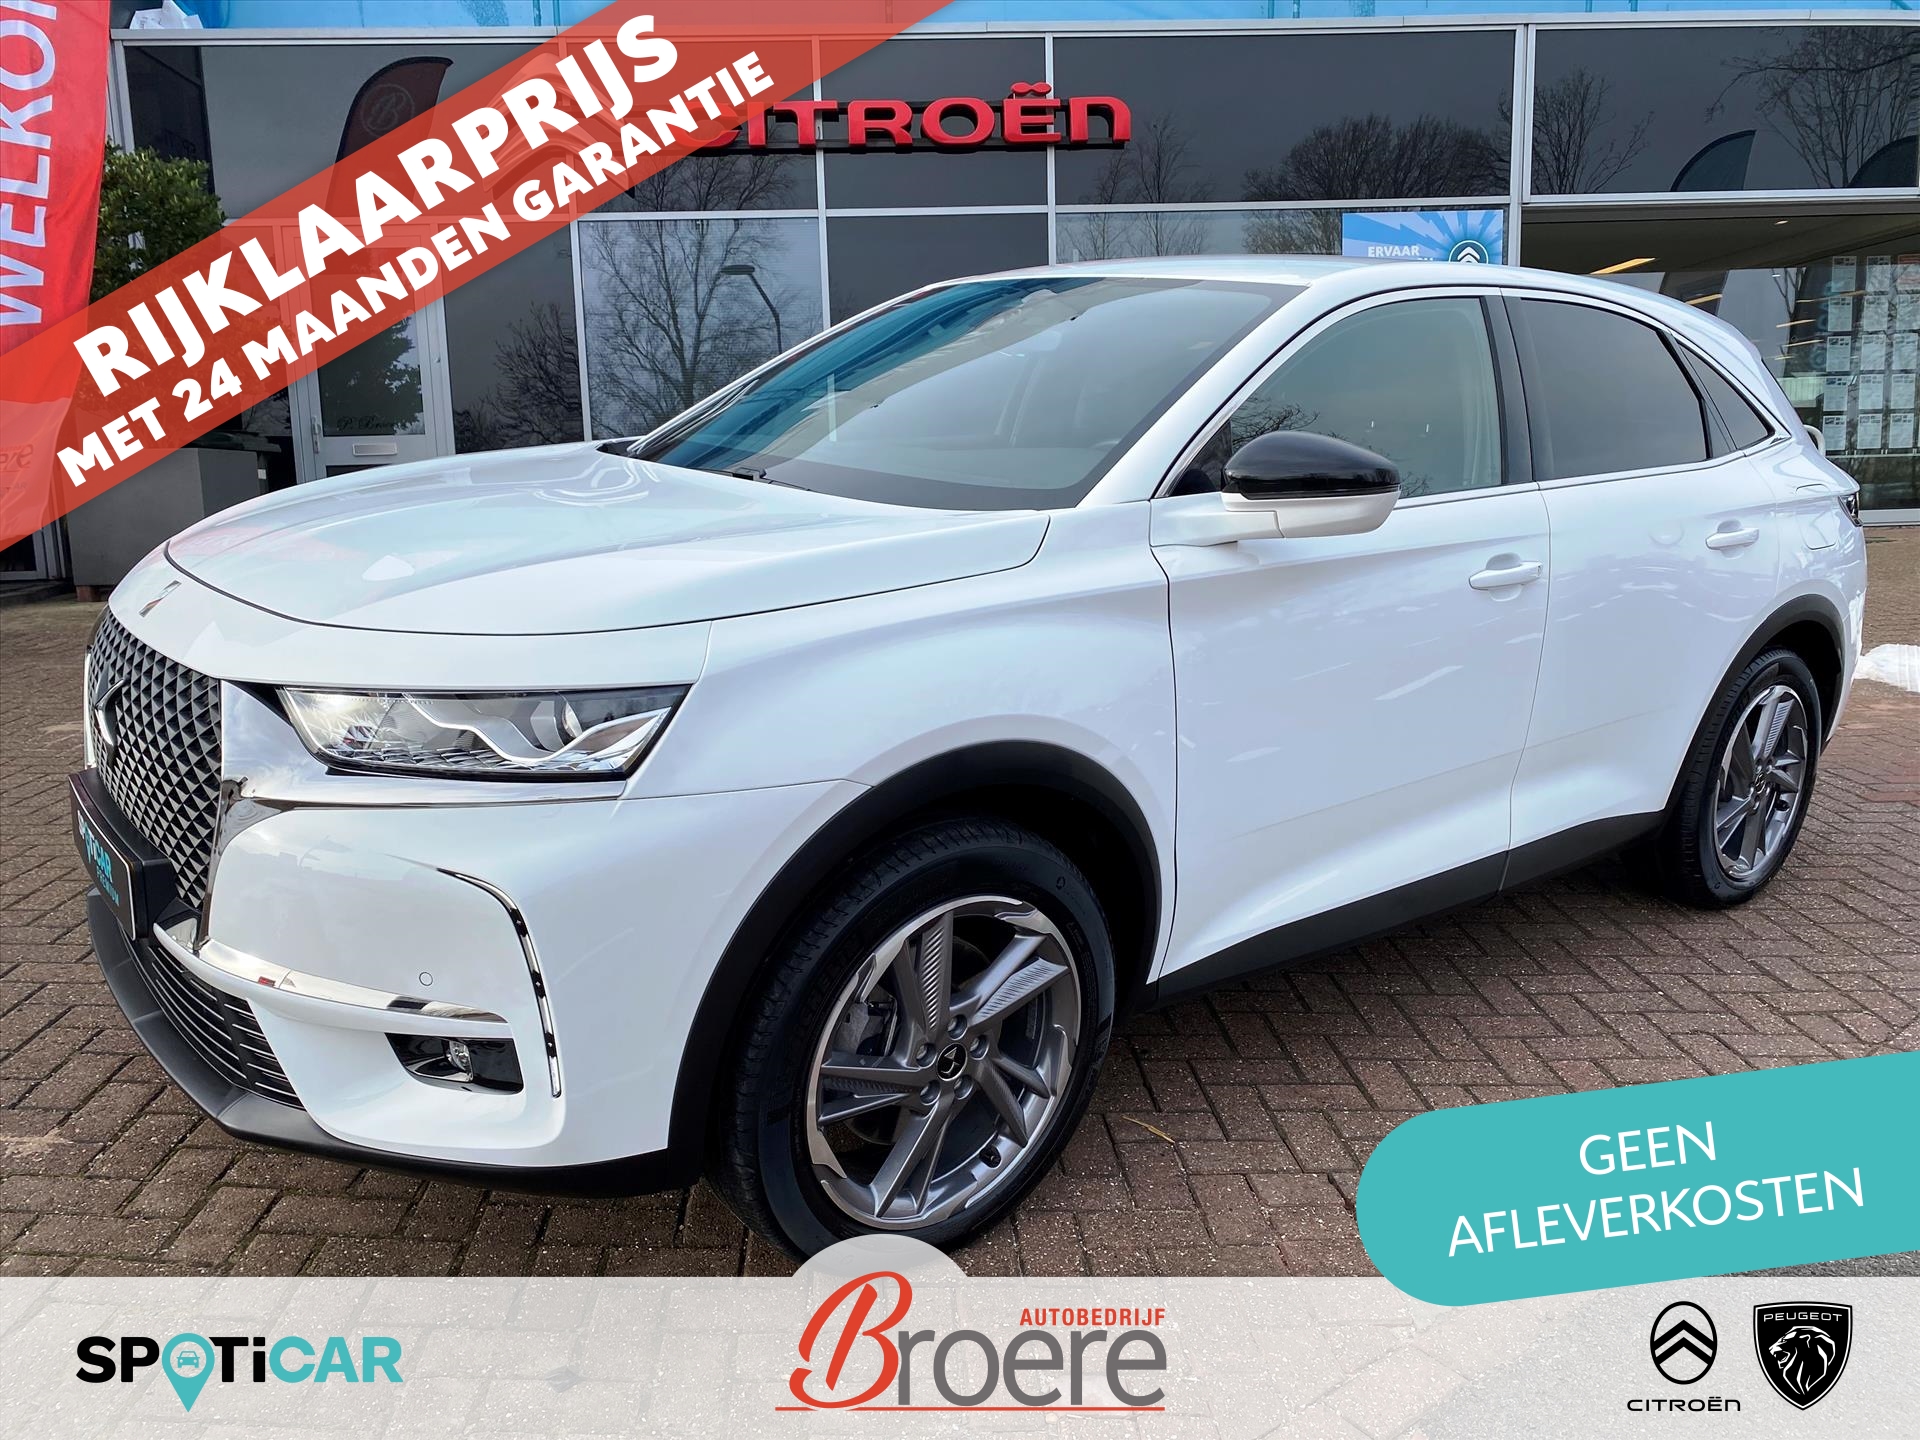 DS Ds 7 Crossback 1.6 E-TENSE 225pk Automaat Business Hybrid |camera, parkeersensoren voor en achter, dab, 19 inch velgen, apple car play, android auto, climate, cruise